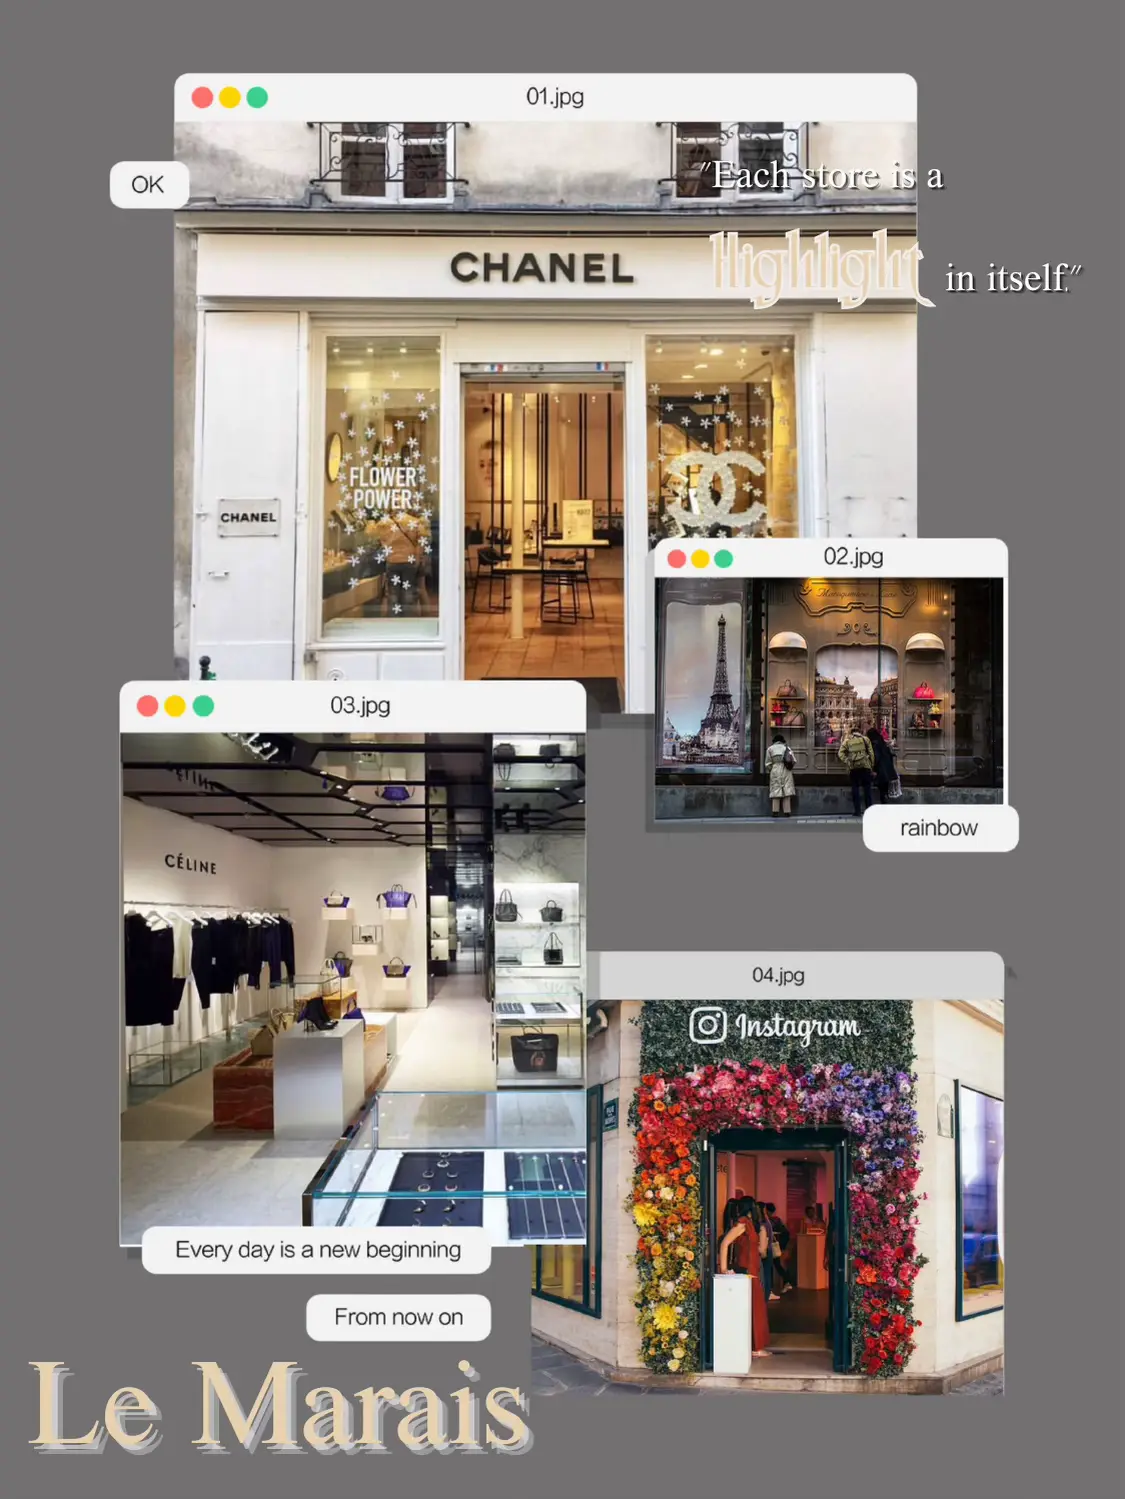 chanel storefront